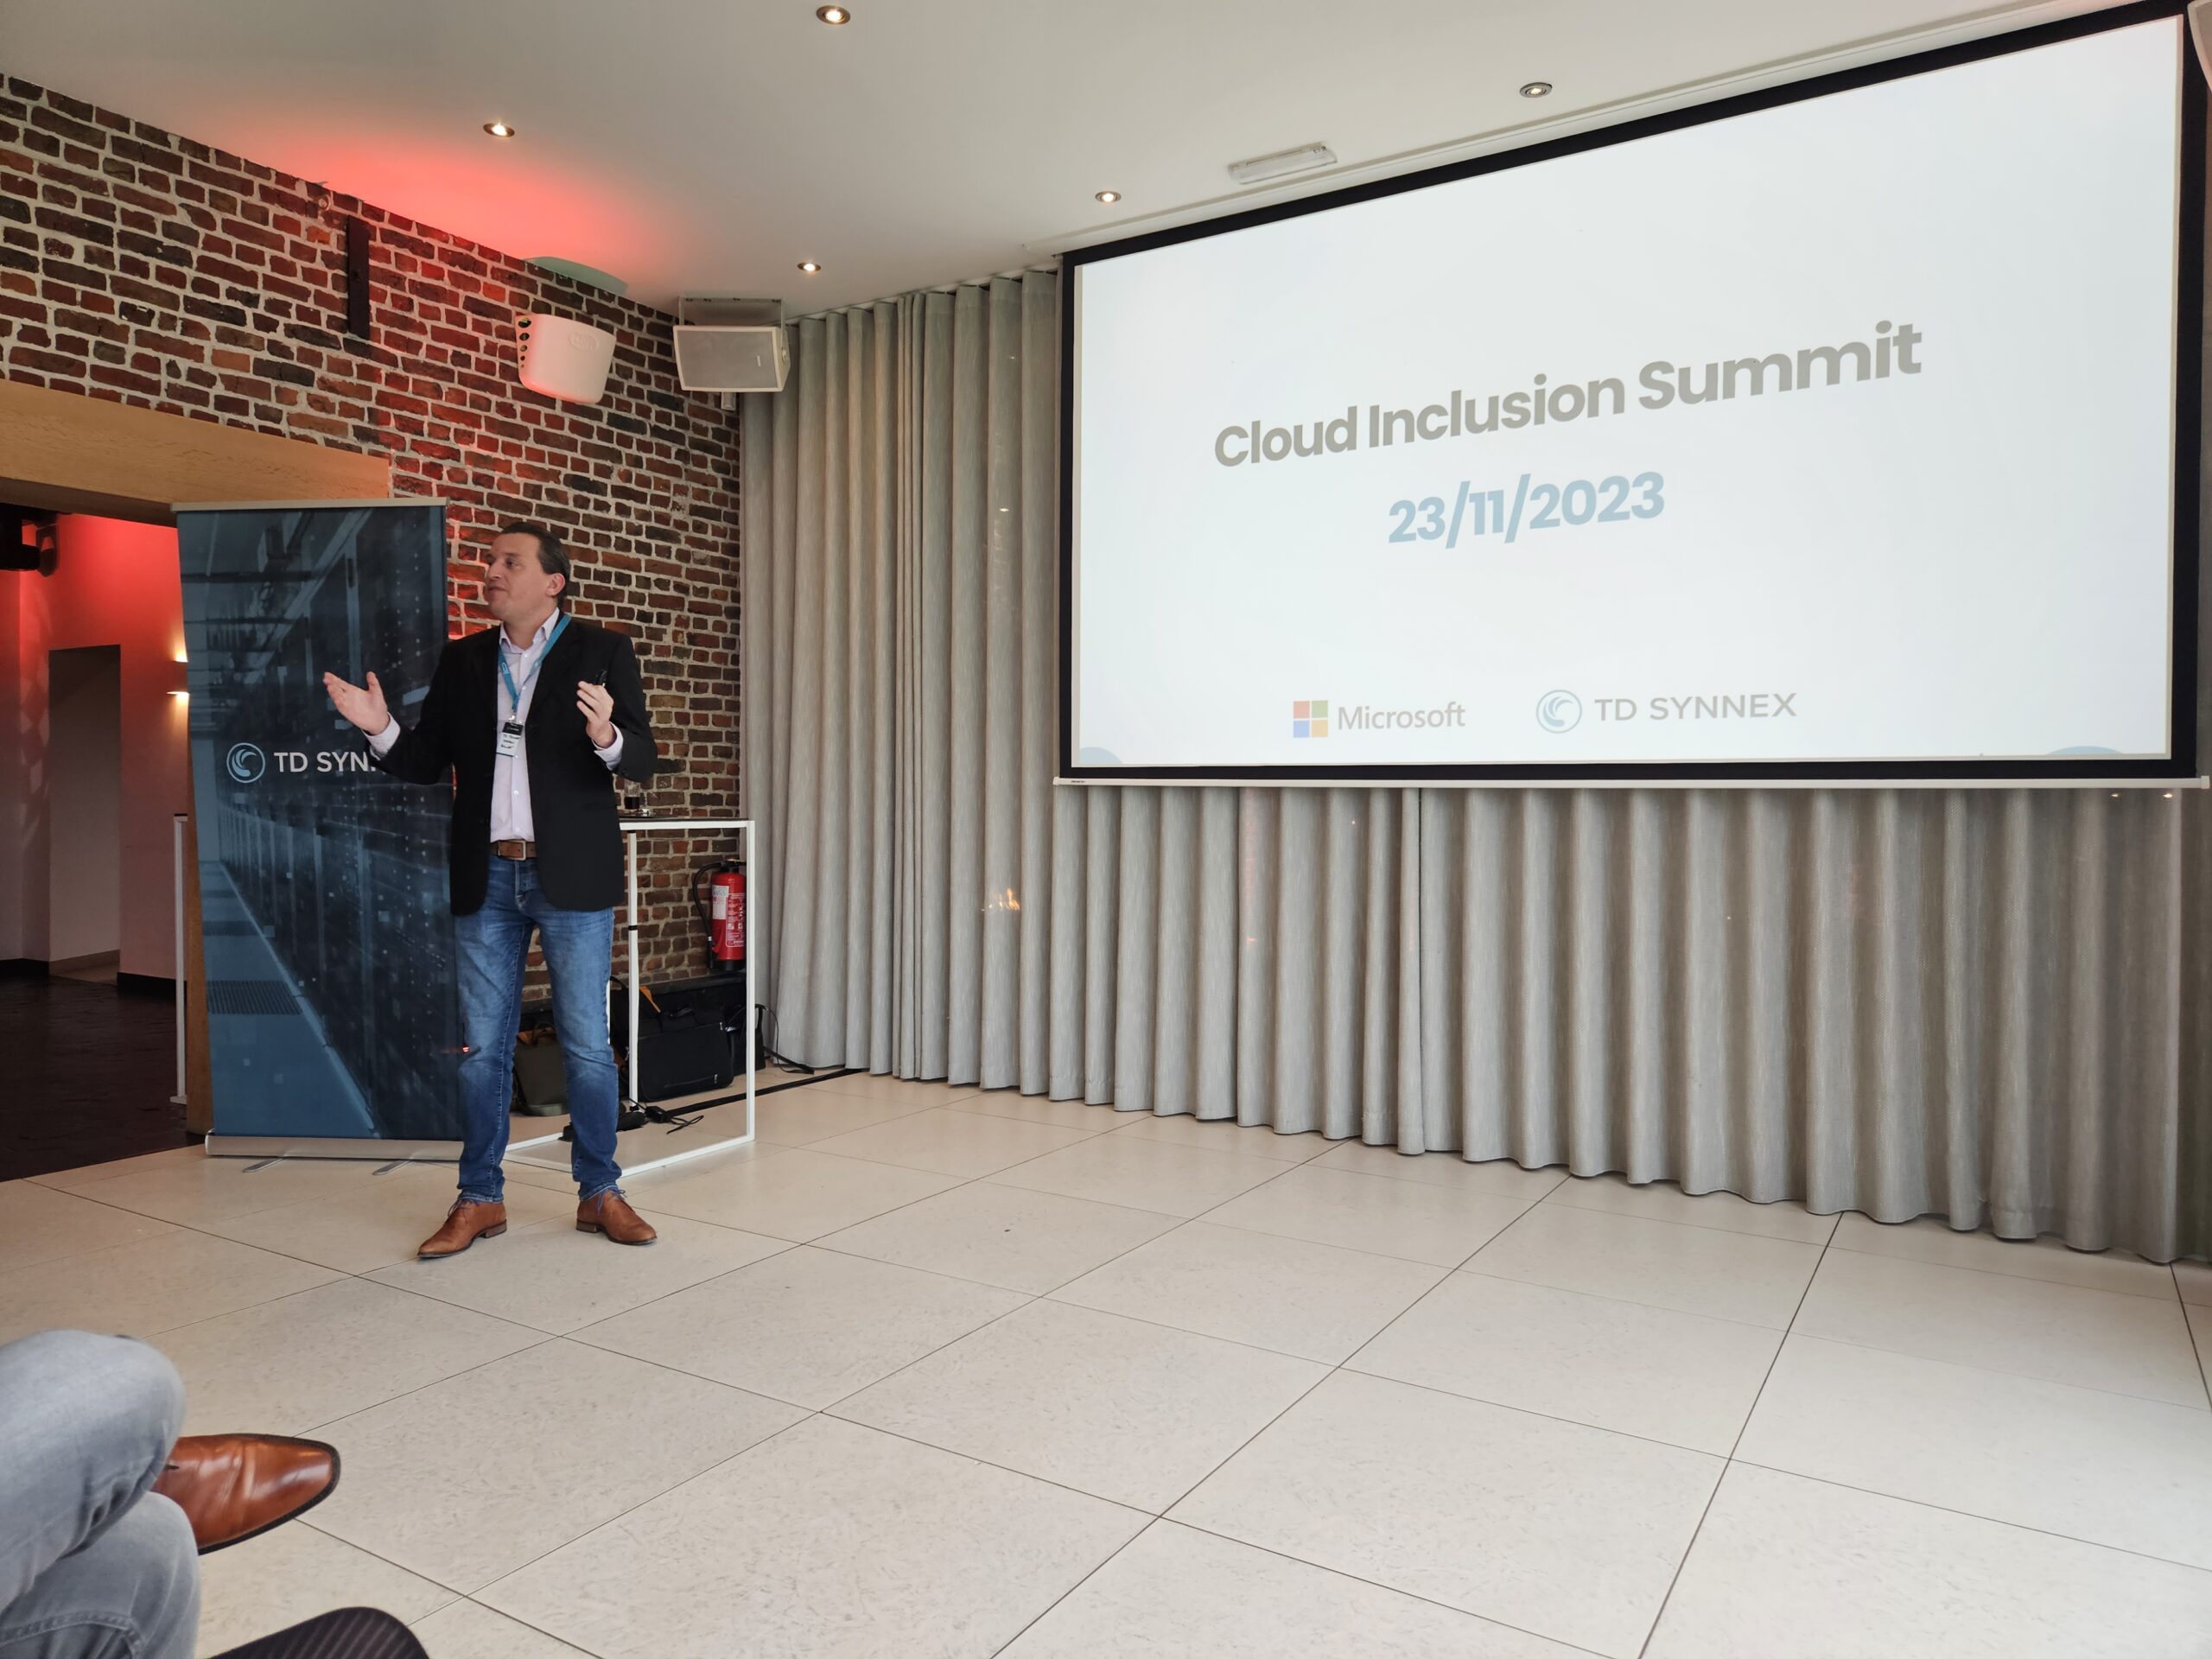 Cloud Inclusion Summit 2023